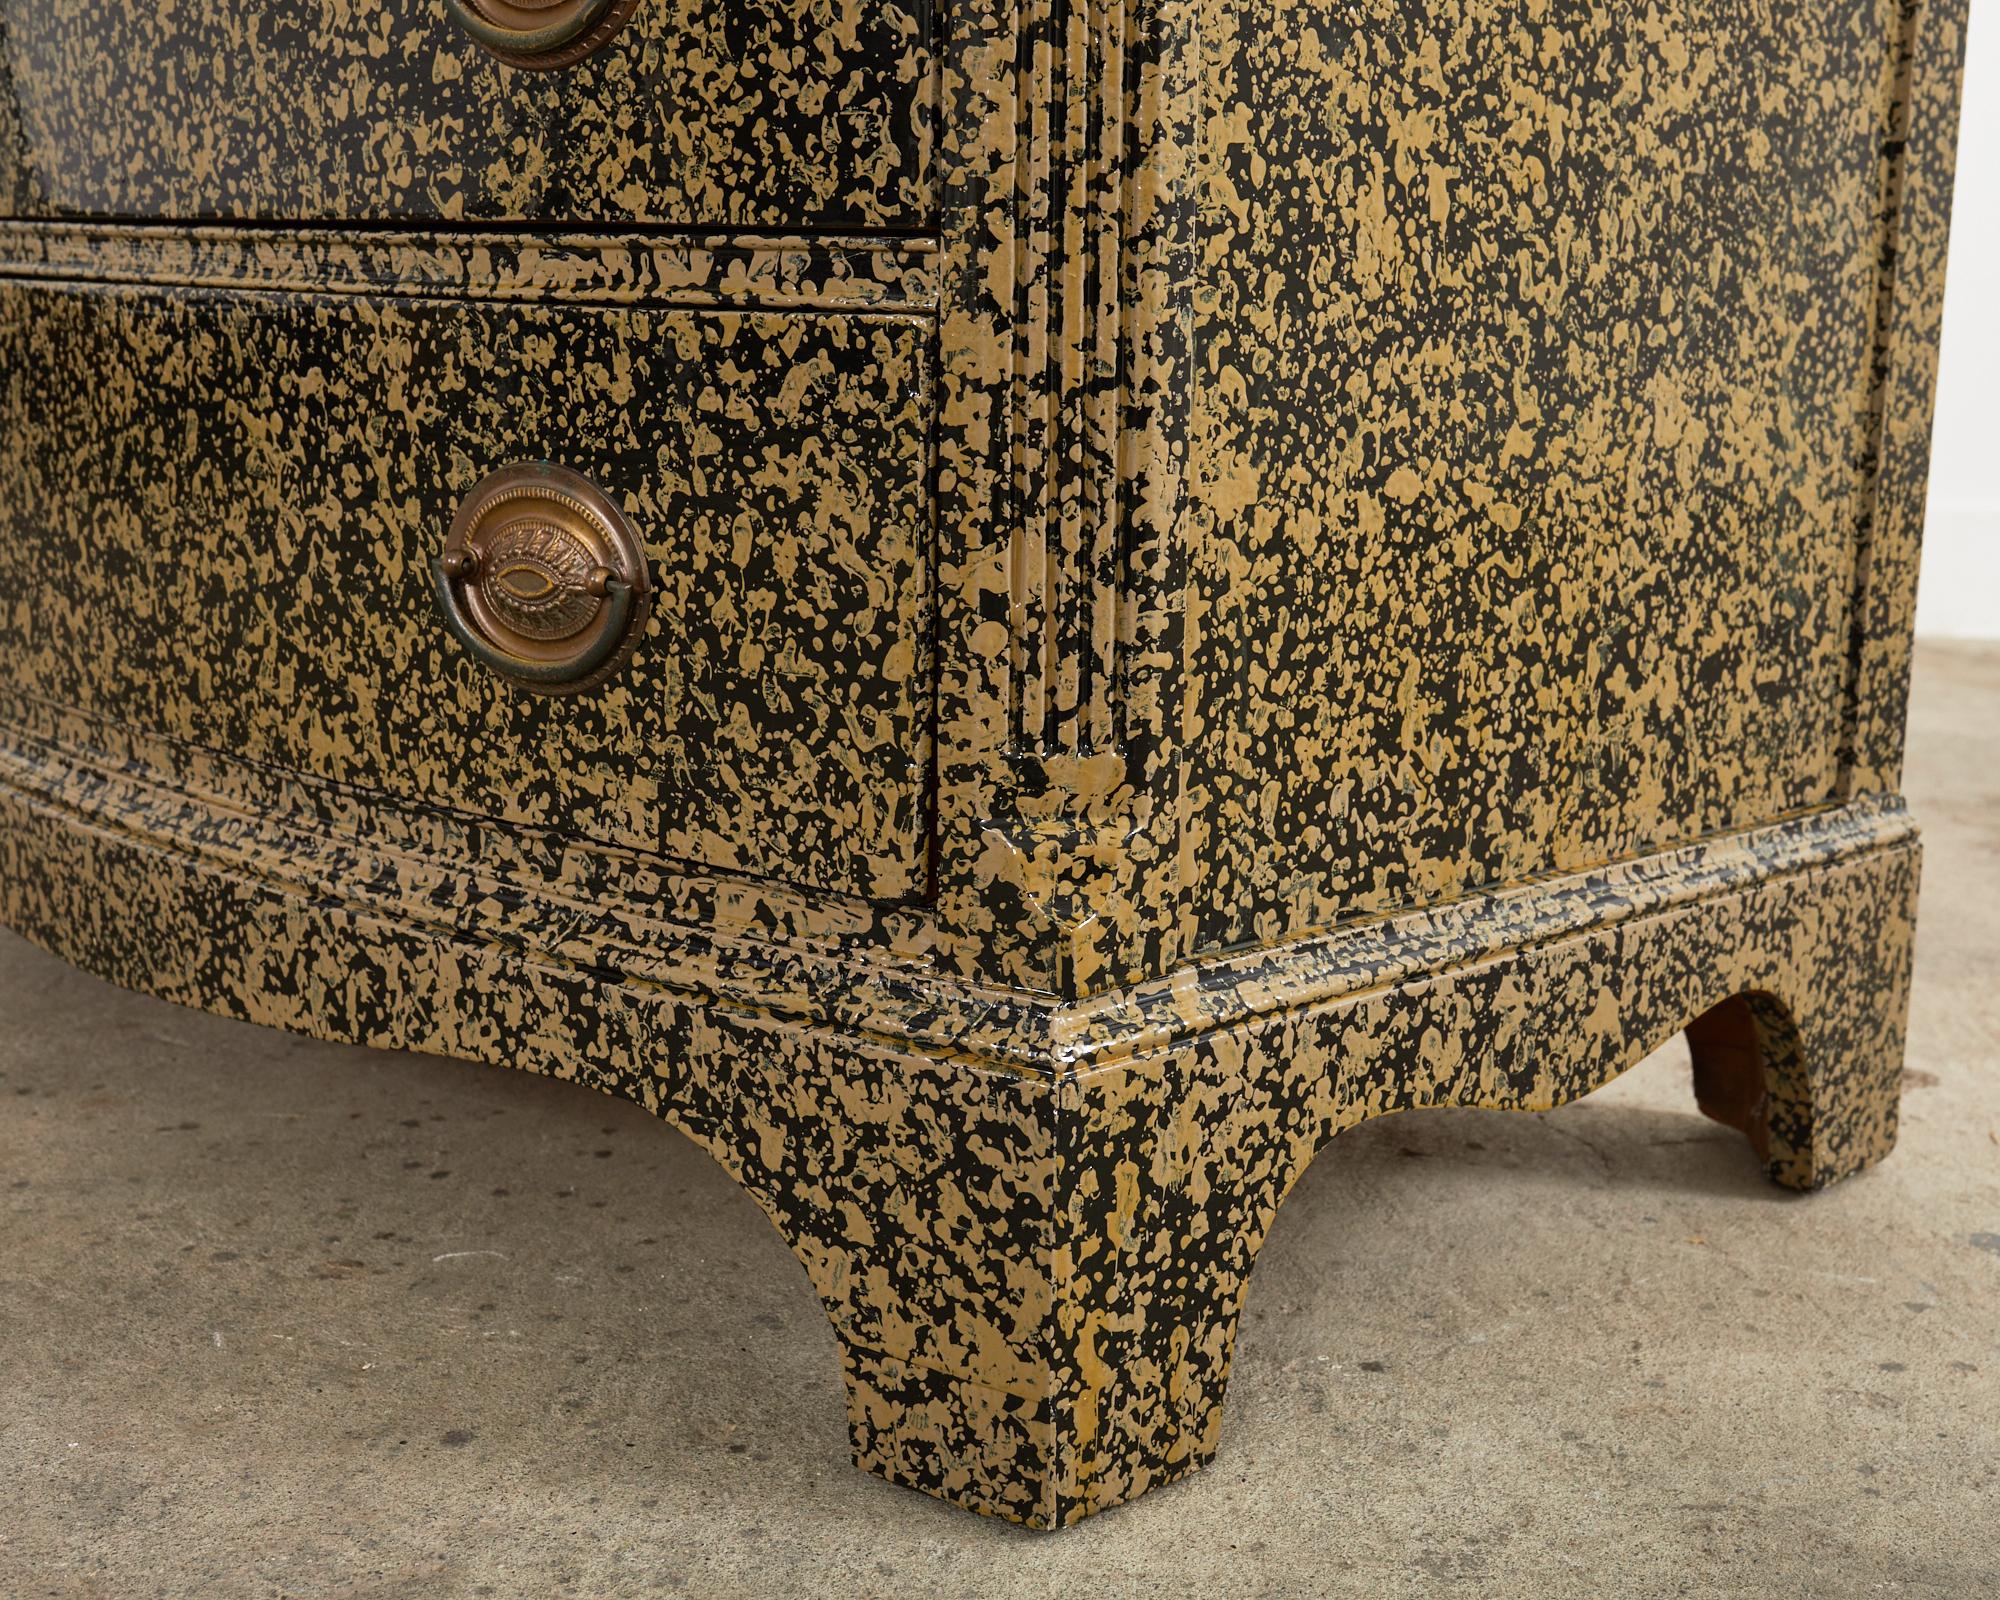 19th Century English Georgian Commode Speckled by Ira Yeager 11